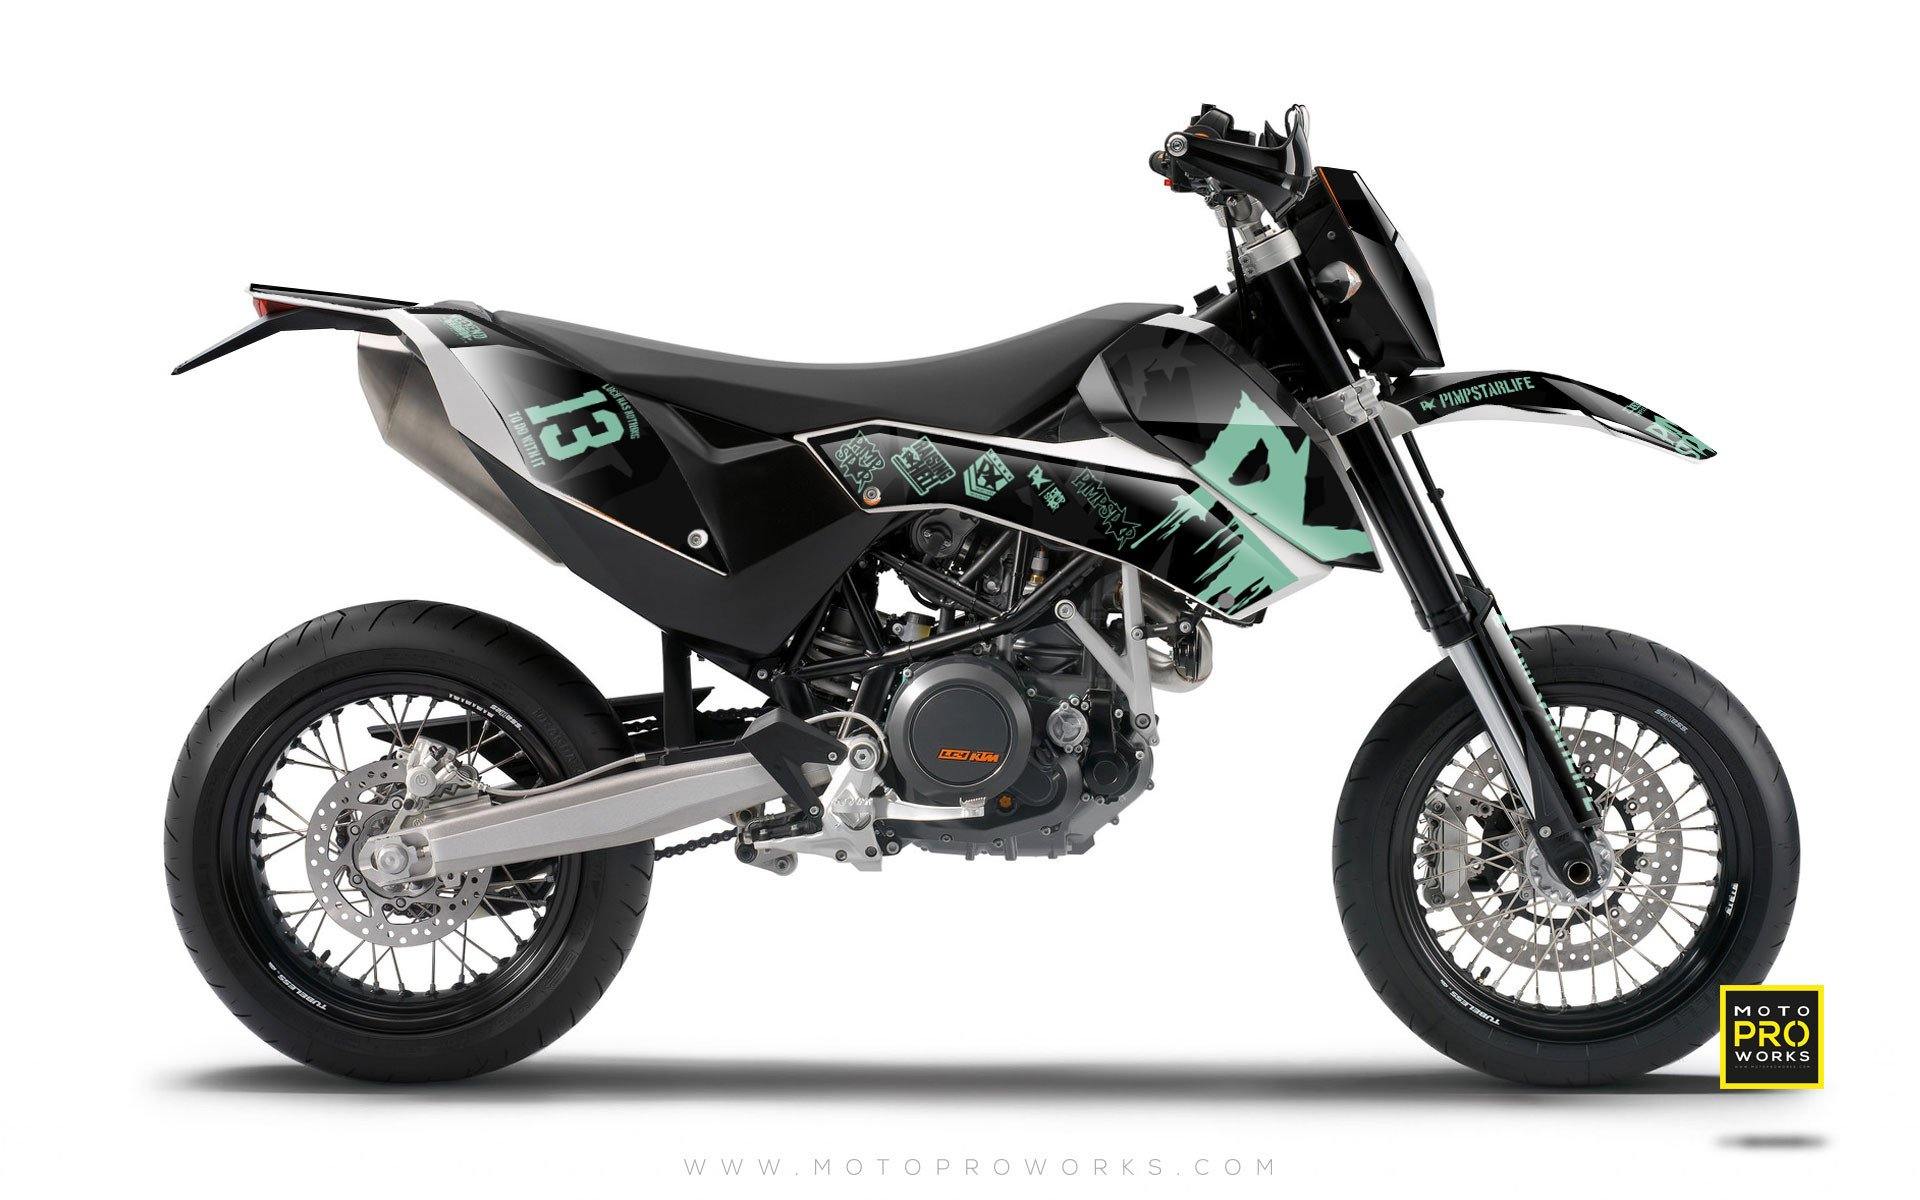 KTM GRAPHIC KIT - "M90" (midnight) - MotoProWorks | Decals and Bike Graphic kit